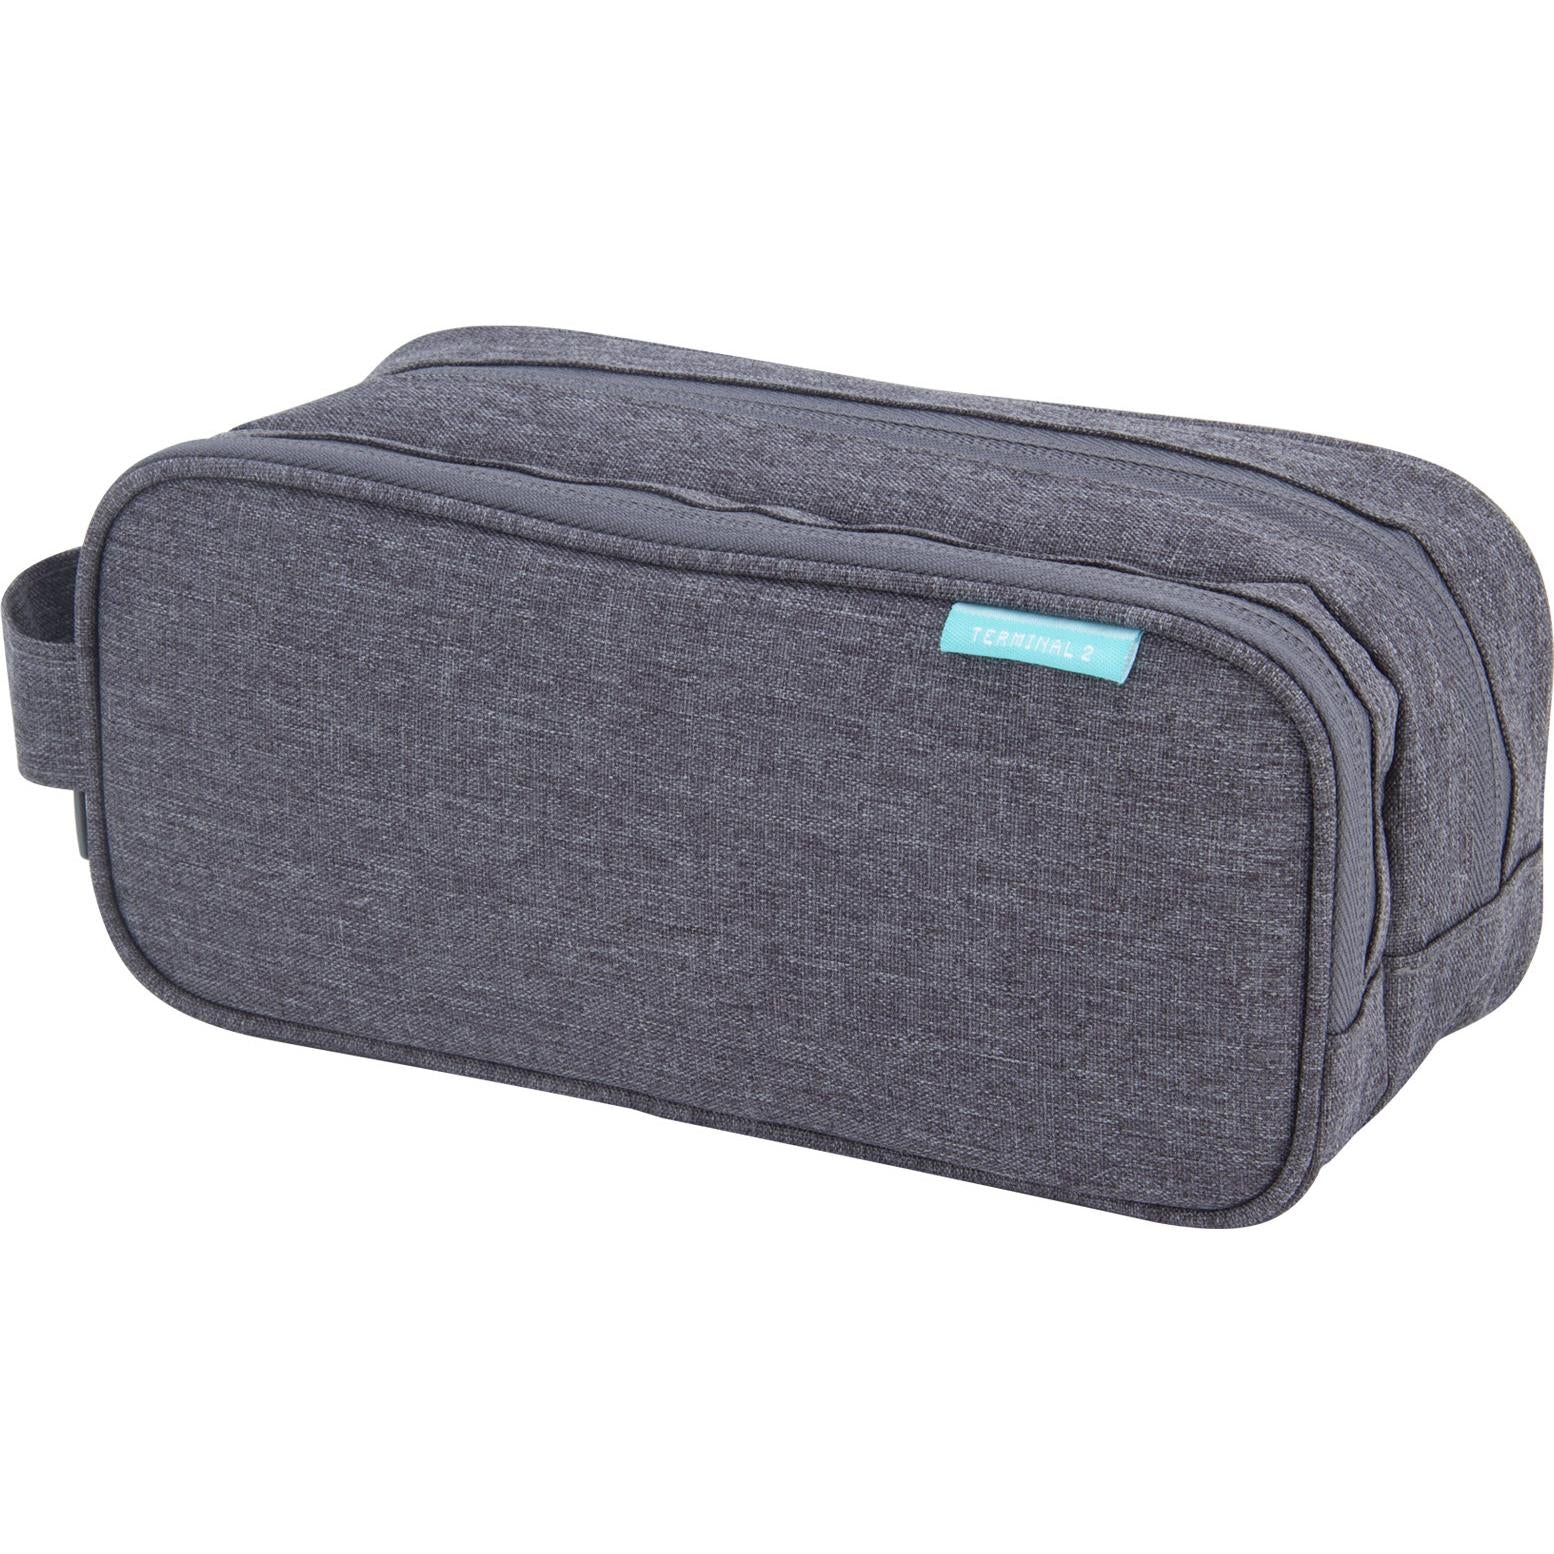 Travel Gadget Organizer Pouch Case | Hard Drive Bag | for Chargers, Cables, Travel Routers Grey